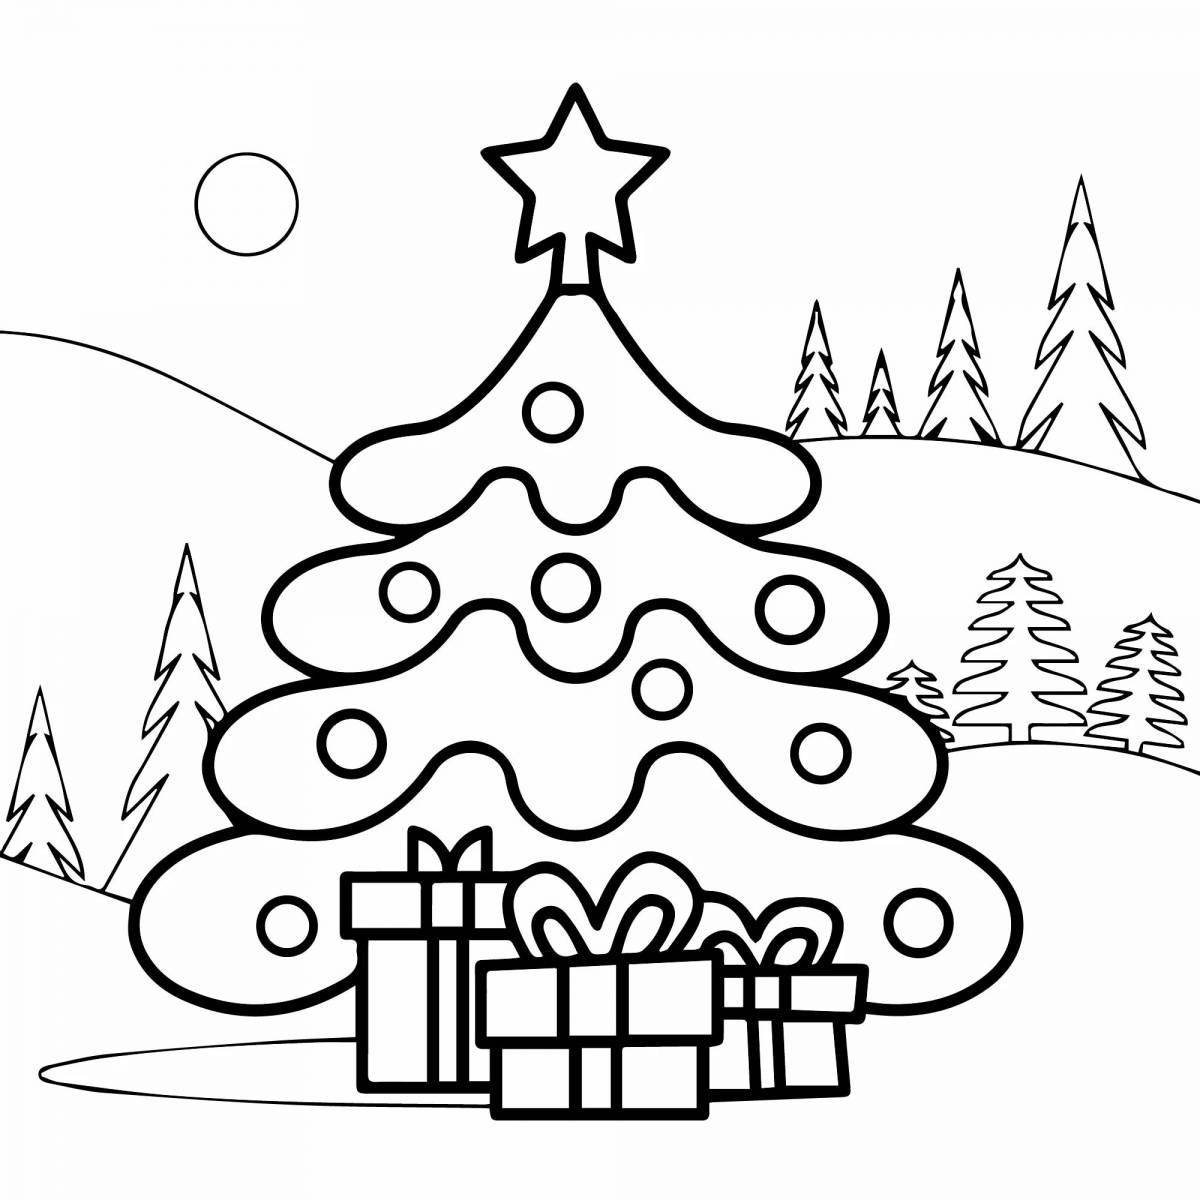 Fantastic Christmas tree coloring book for 5-6 year olds